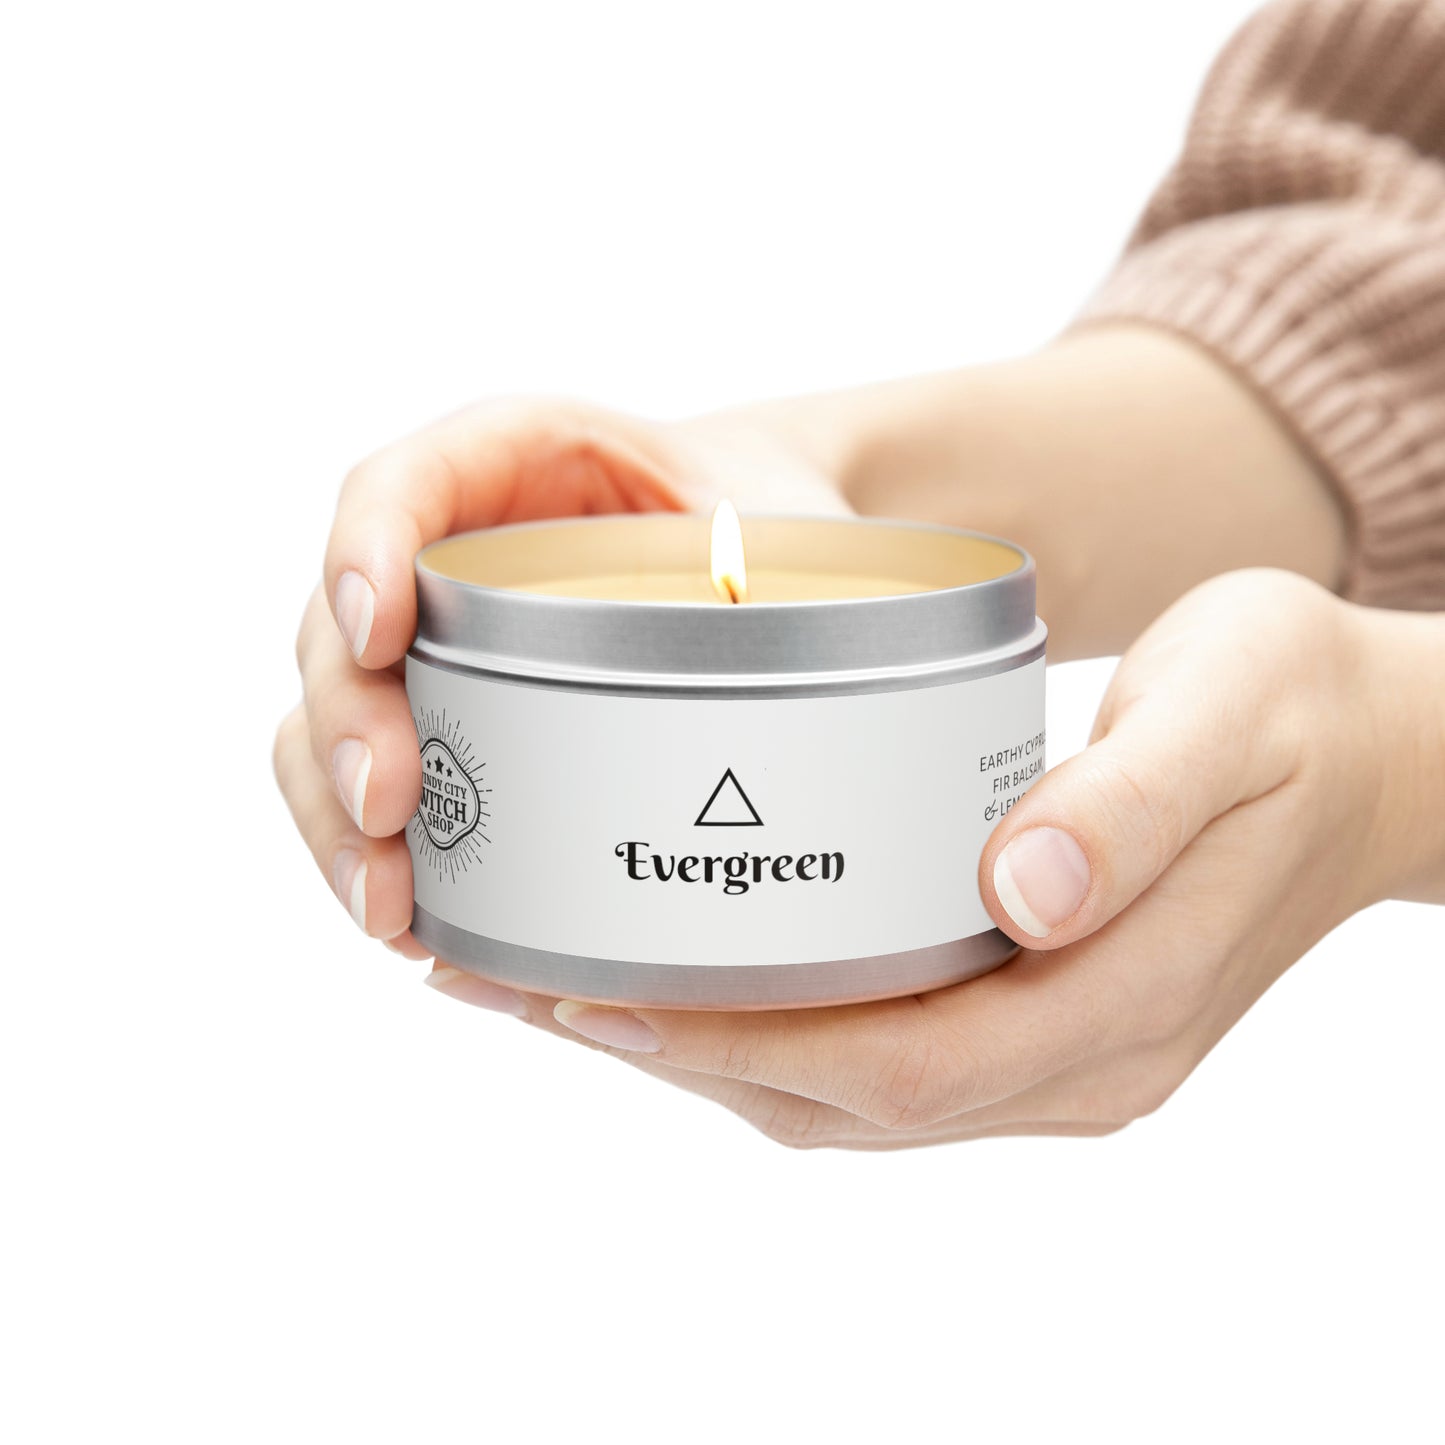 Evergreen - tin candle, scented